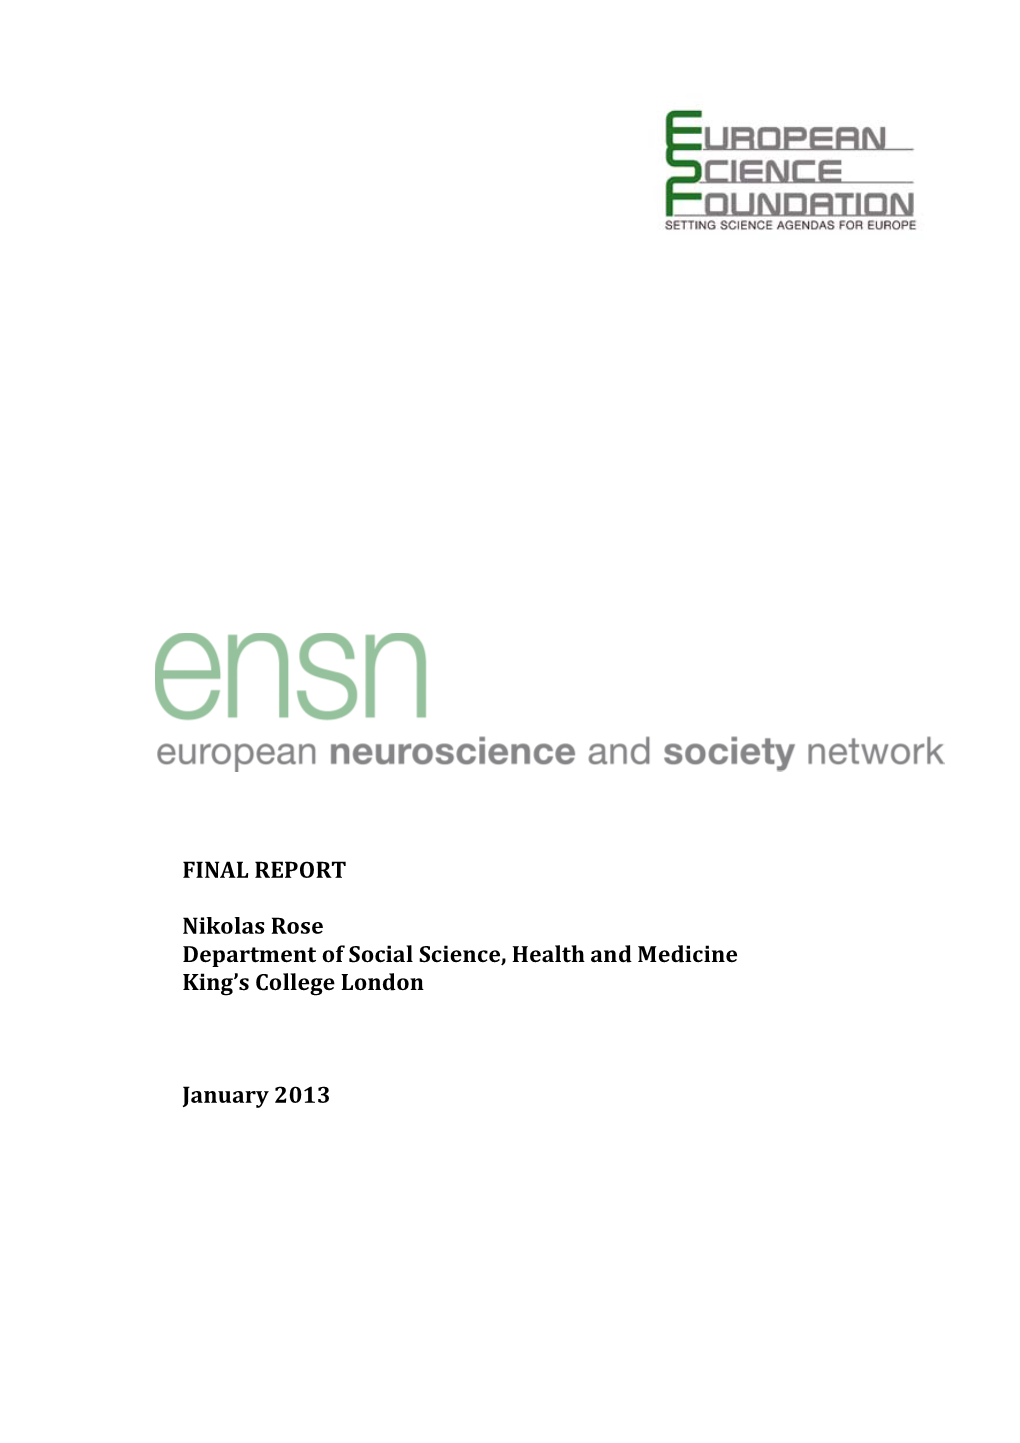 The ENSN Final Report